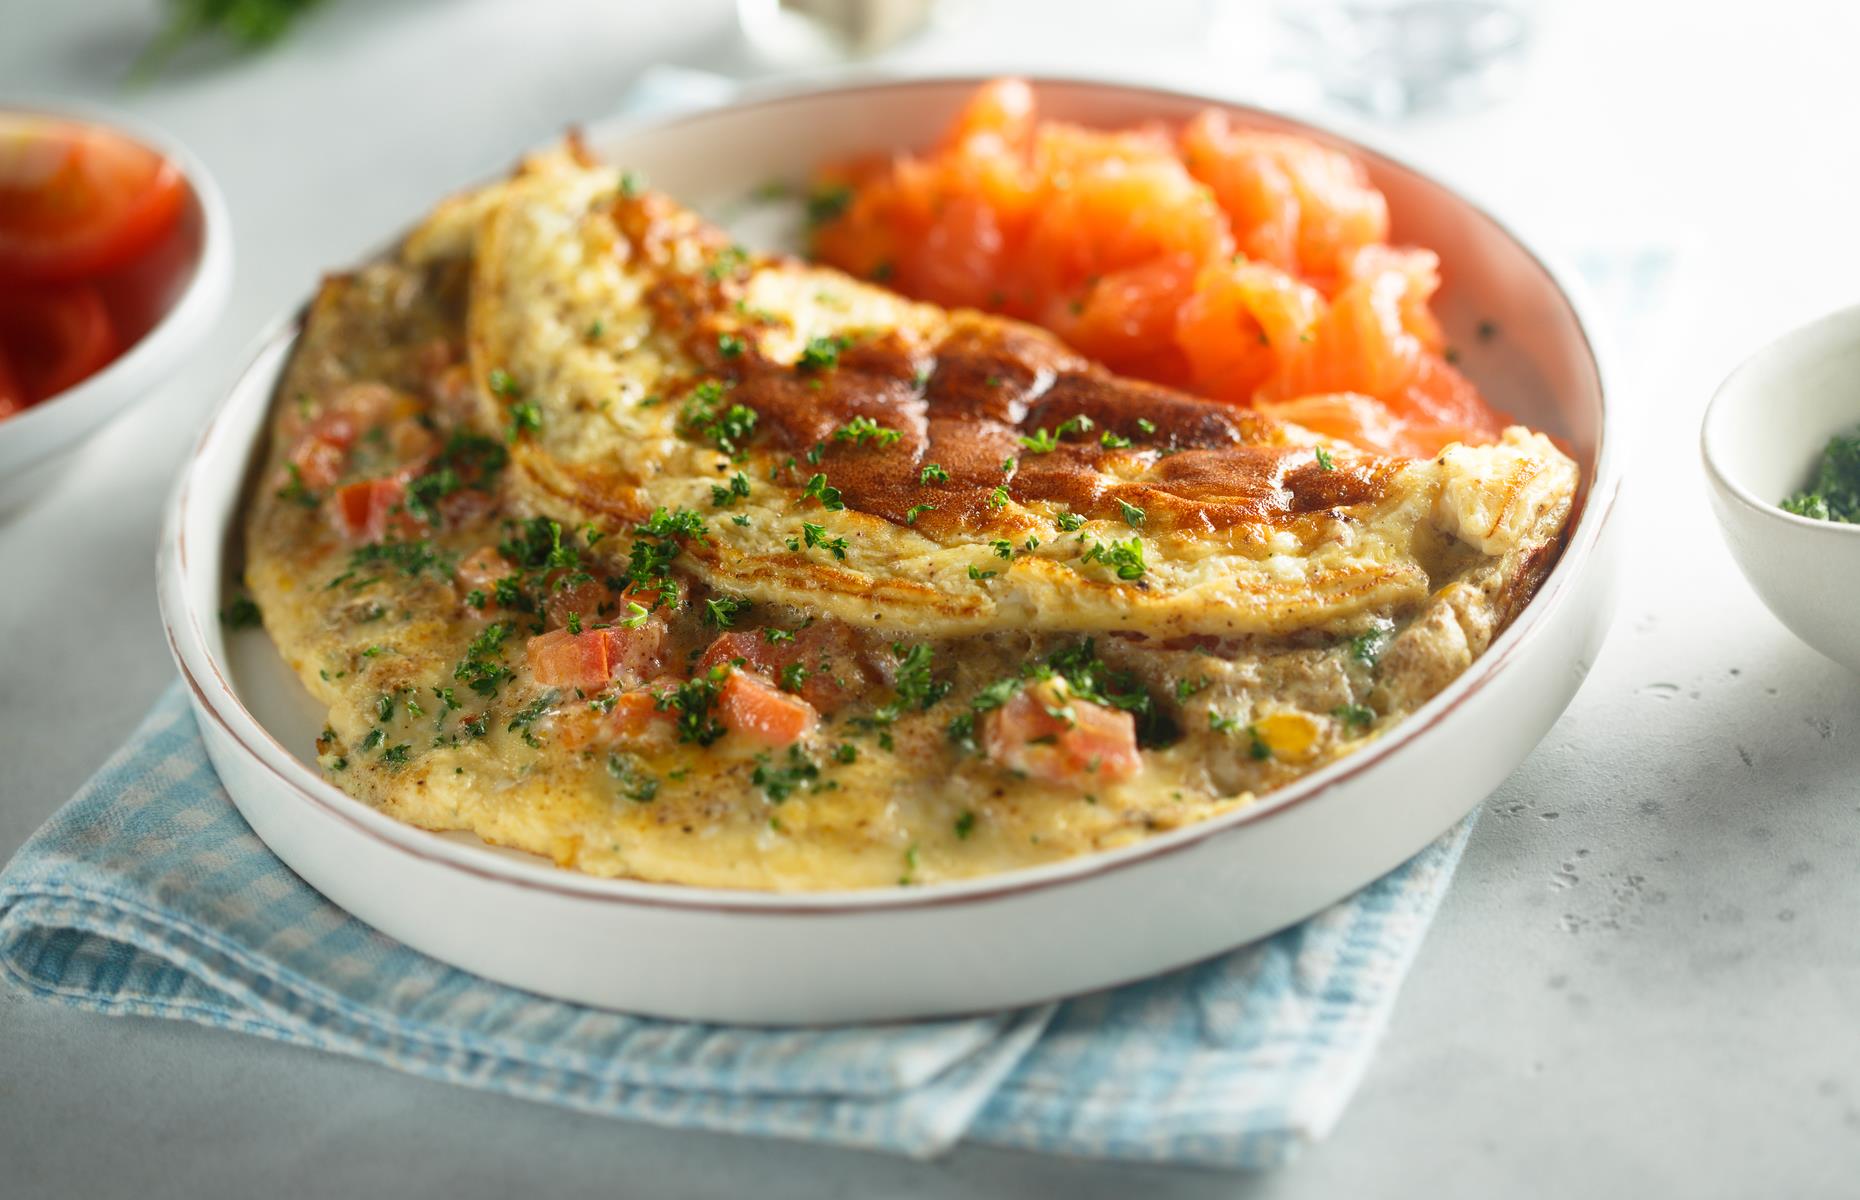 Under 5 minutes: smoked salmon omelet